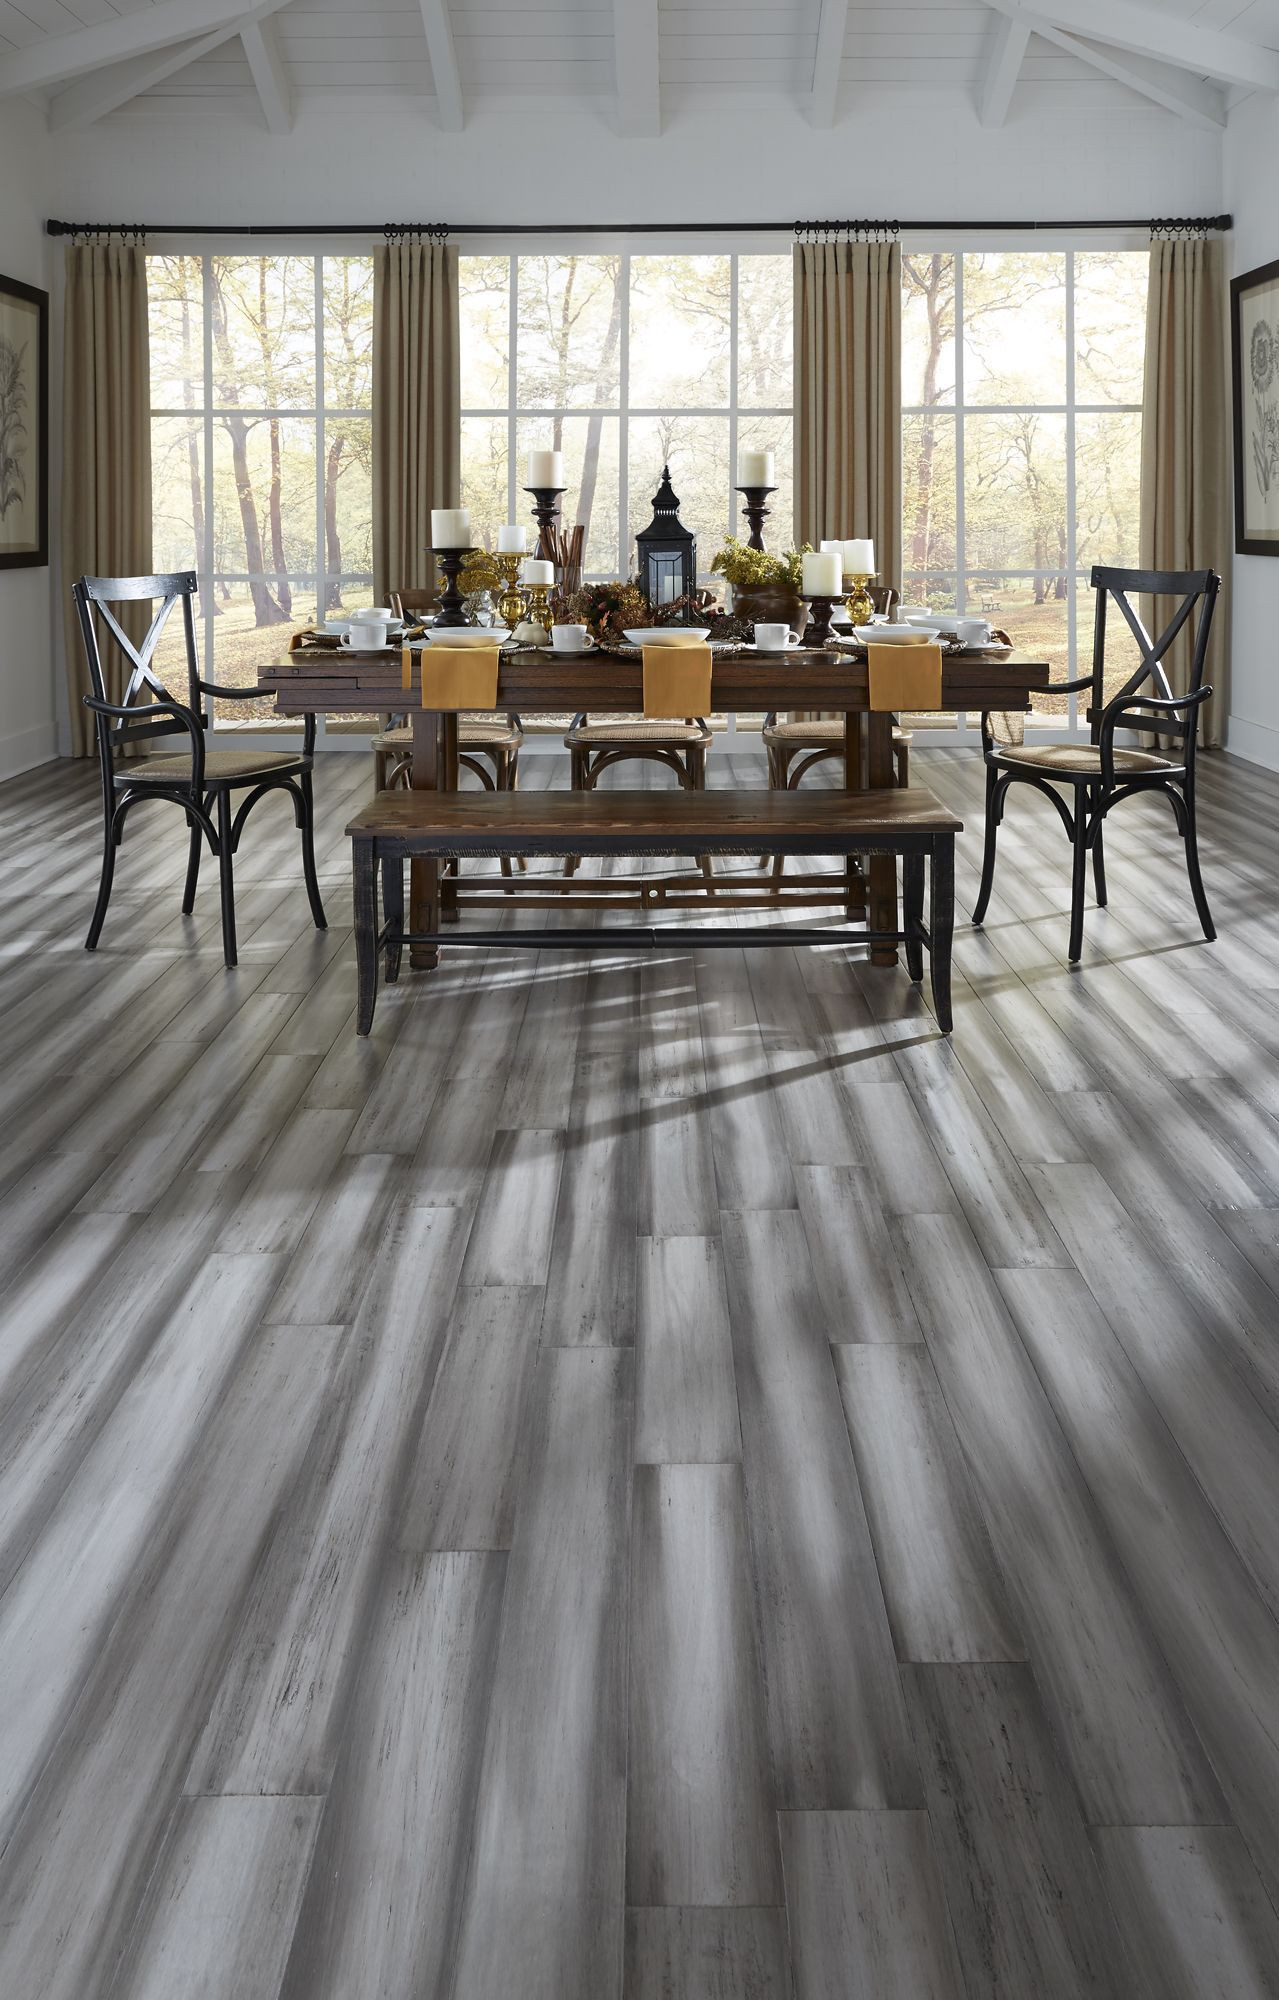 25 Famous Hardwood Flooring Hawaii 2024 free download hardwood flooring hawaii of bamboo flooring pin by fine floorz on cali bamboo hardwood flooring within bamboo flooring modern design and rustic texture pair perfectly with the stately bamboo